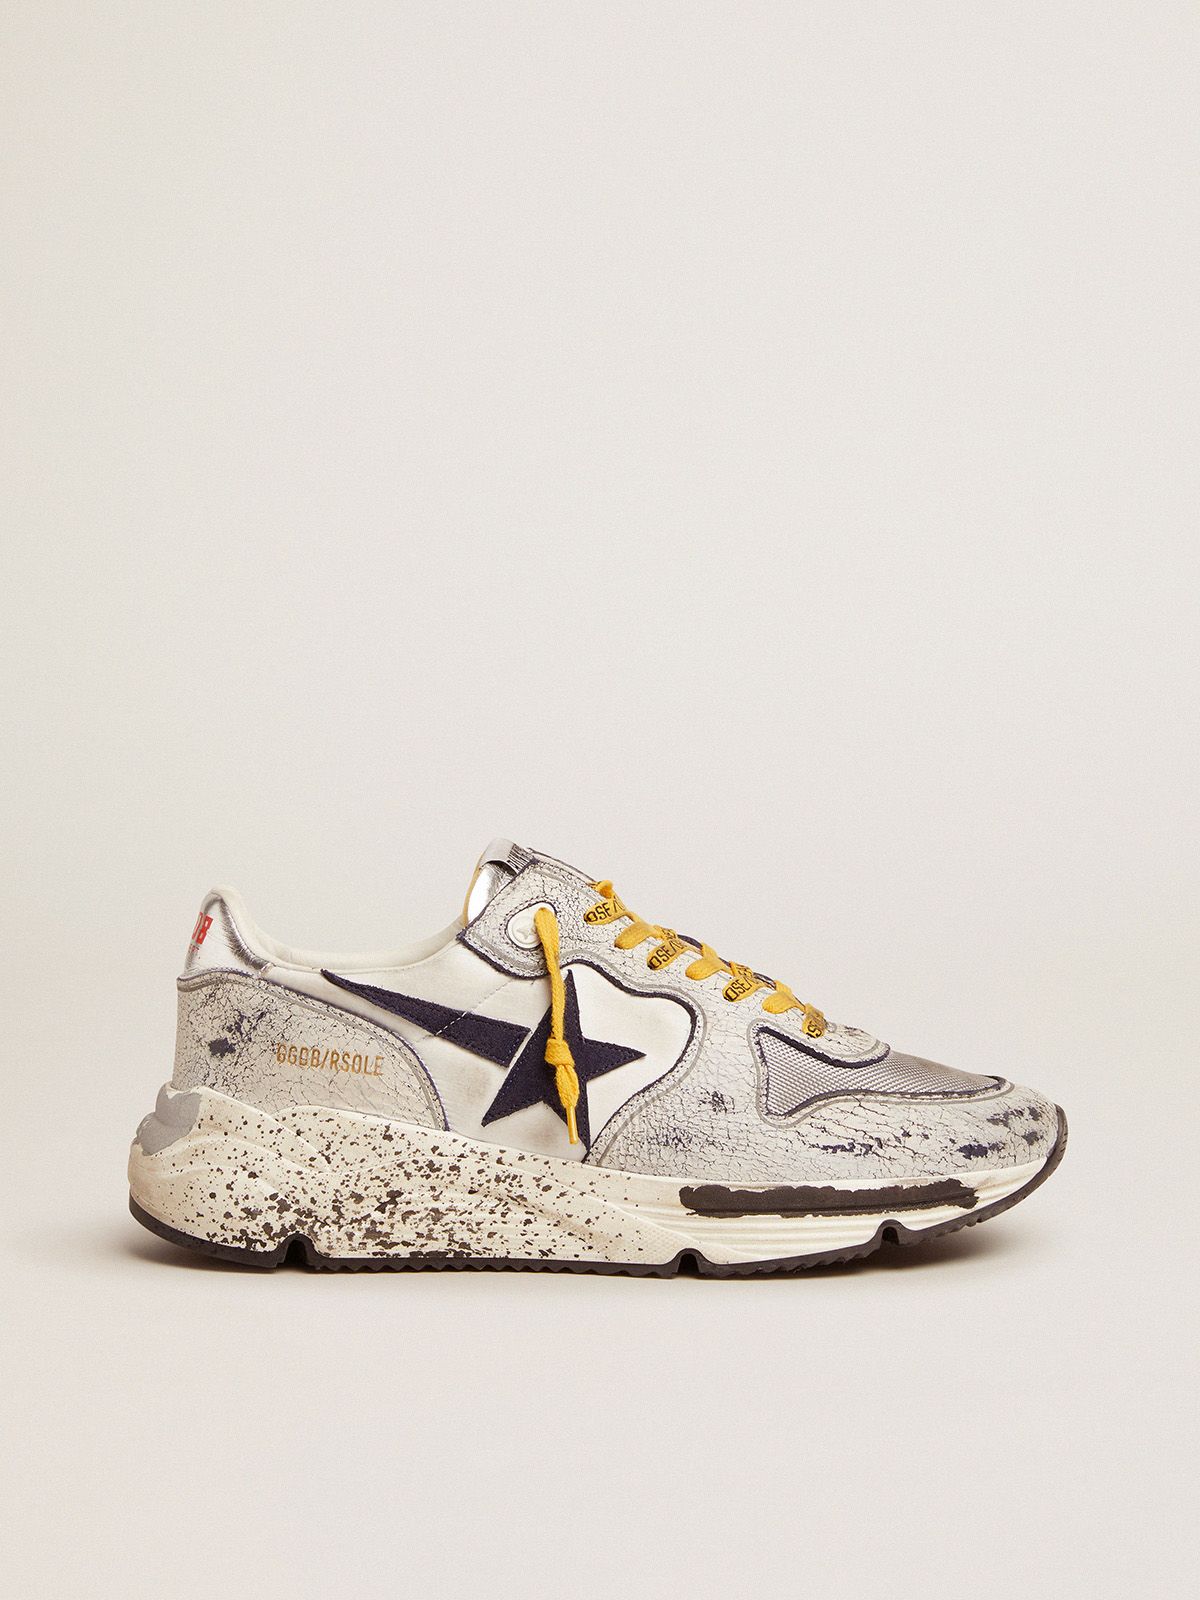 golden goose crackle inserts white sneakers with leather in nylon Running Sole